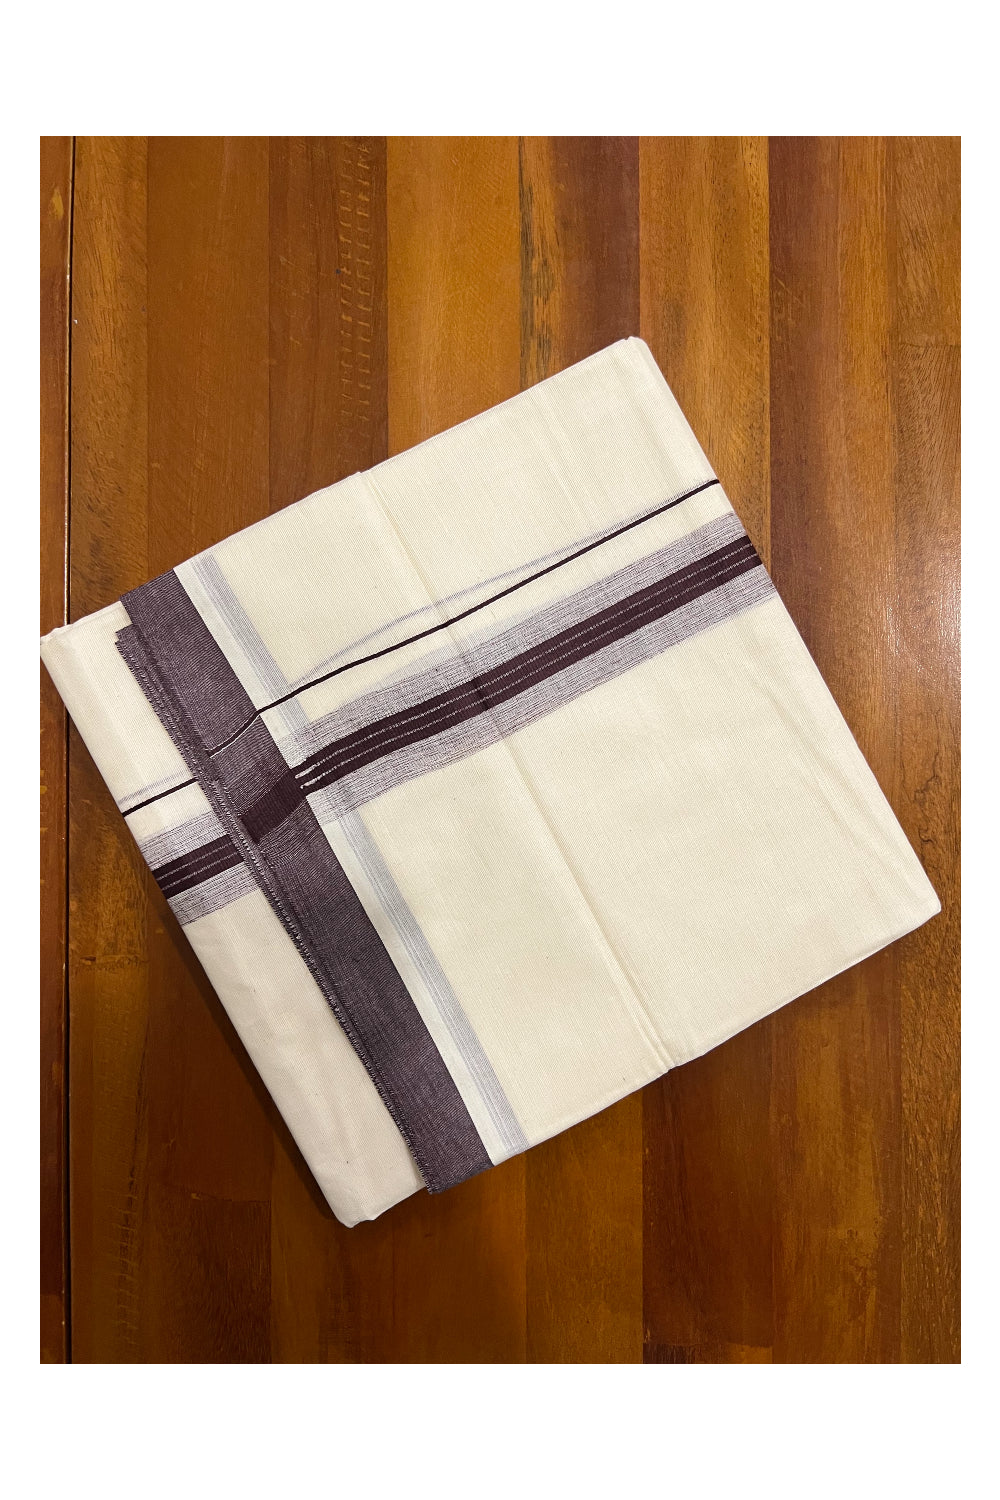 Pure Cotton Off White Double Mundu with Dark Brown Border (South Indian Dhoti)